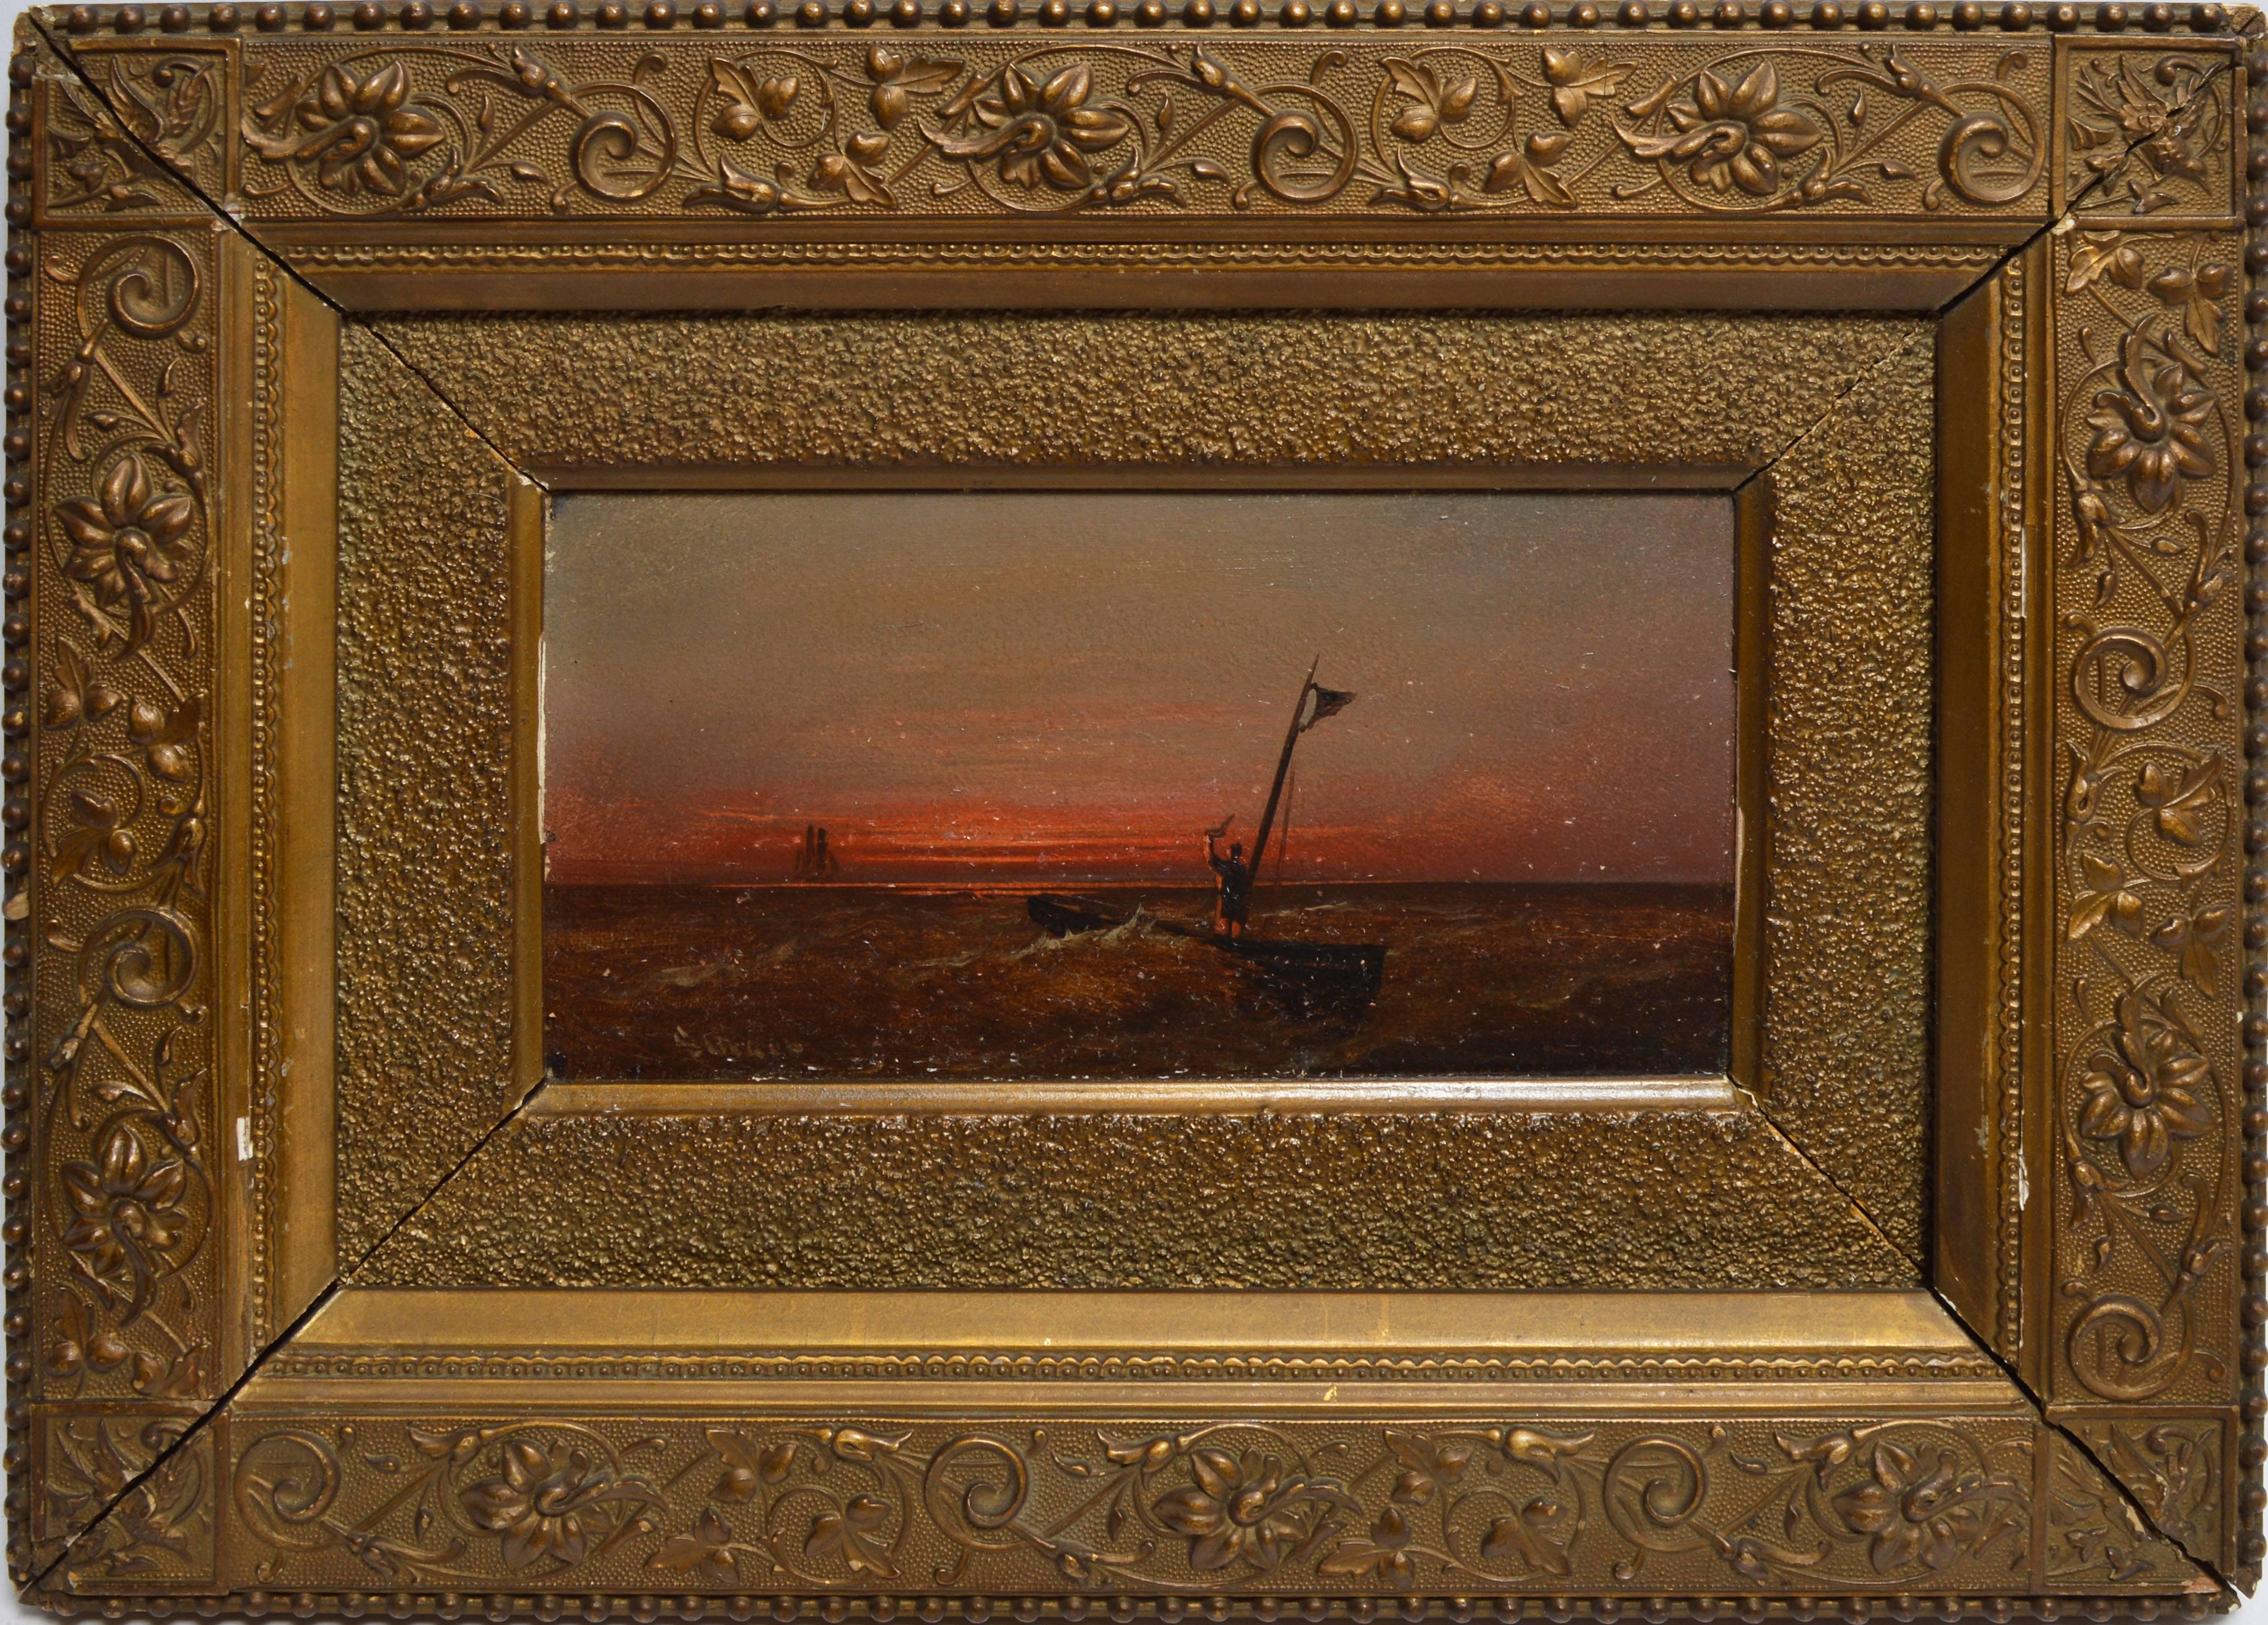 Realist seascape with a sunset by Alexander Charles Stuart (1831-1898). Oil on board, circa 1870. Signed lower right, &quot;Stuart&quot;. Displayed in a giltwood frame.   Image size, 8&quot;L x 4&quot;H, overall 14&quot;L x 10&quot;H.
